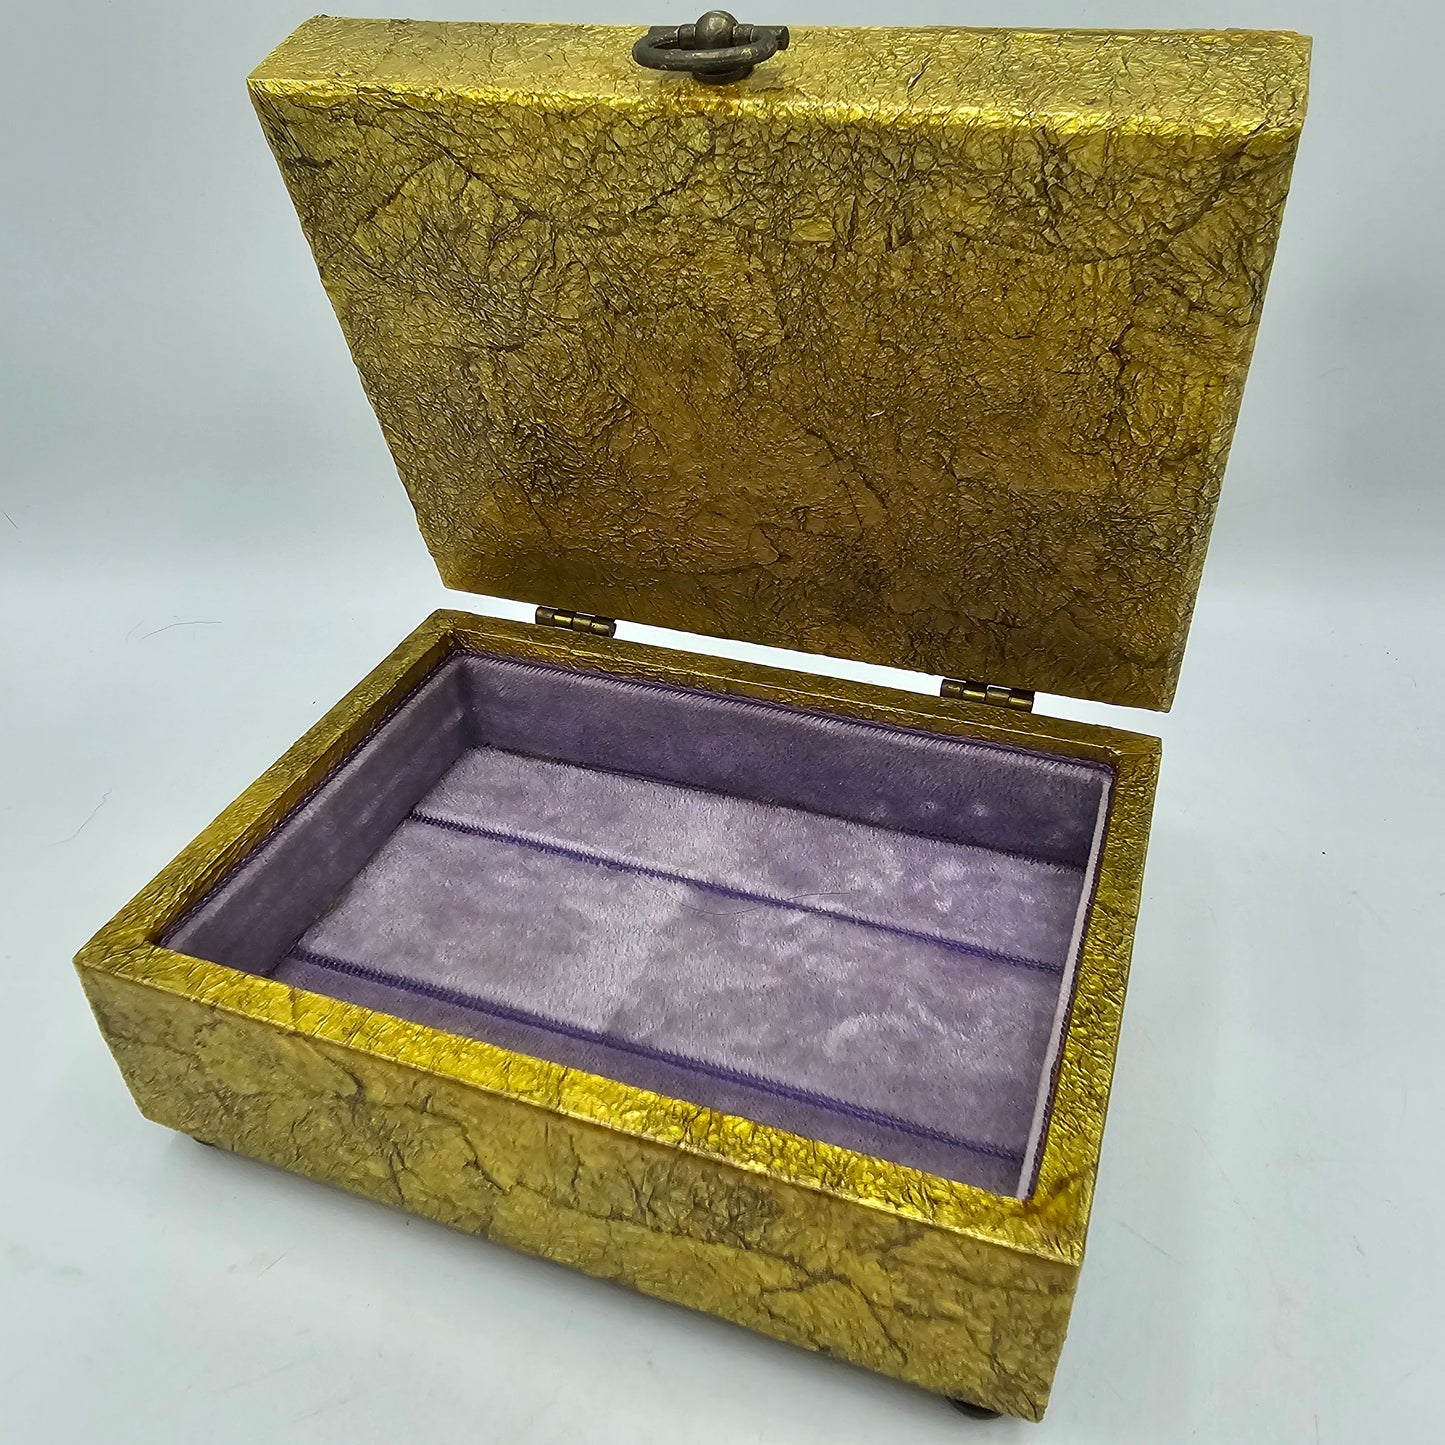 Hinged Jewelry Box with 3D Floral Presentation in the Lid